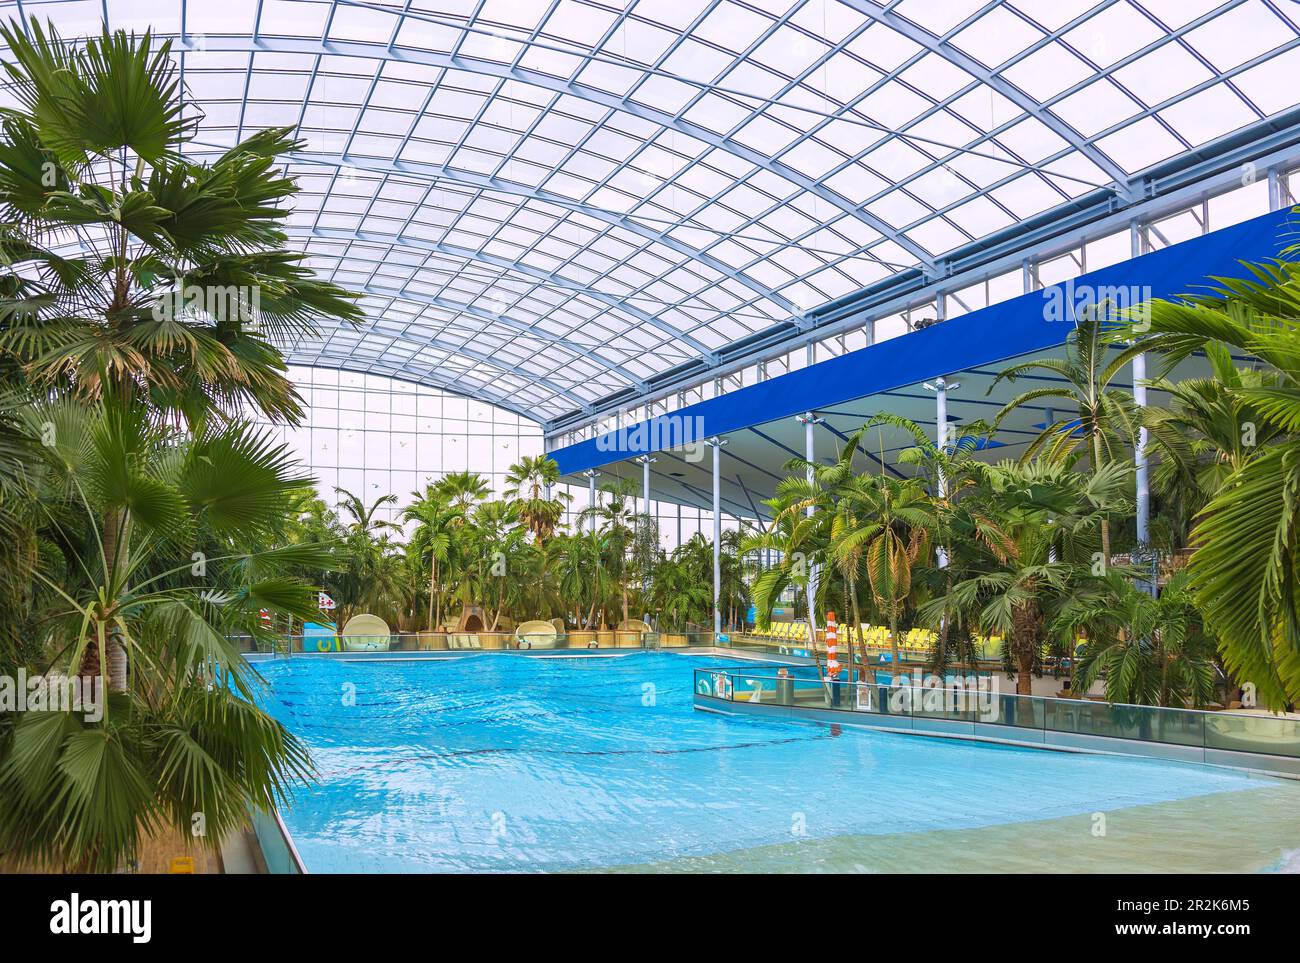 Beat the heat … cool off in Germany's outdoor pools > Spangdahlem Air Base  > Article Display